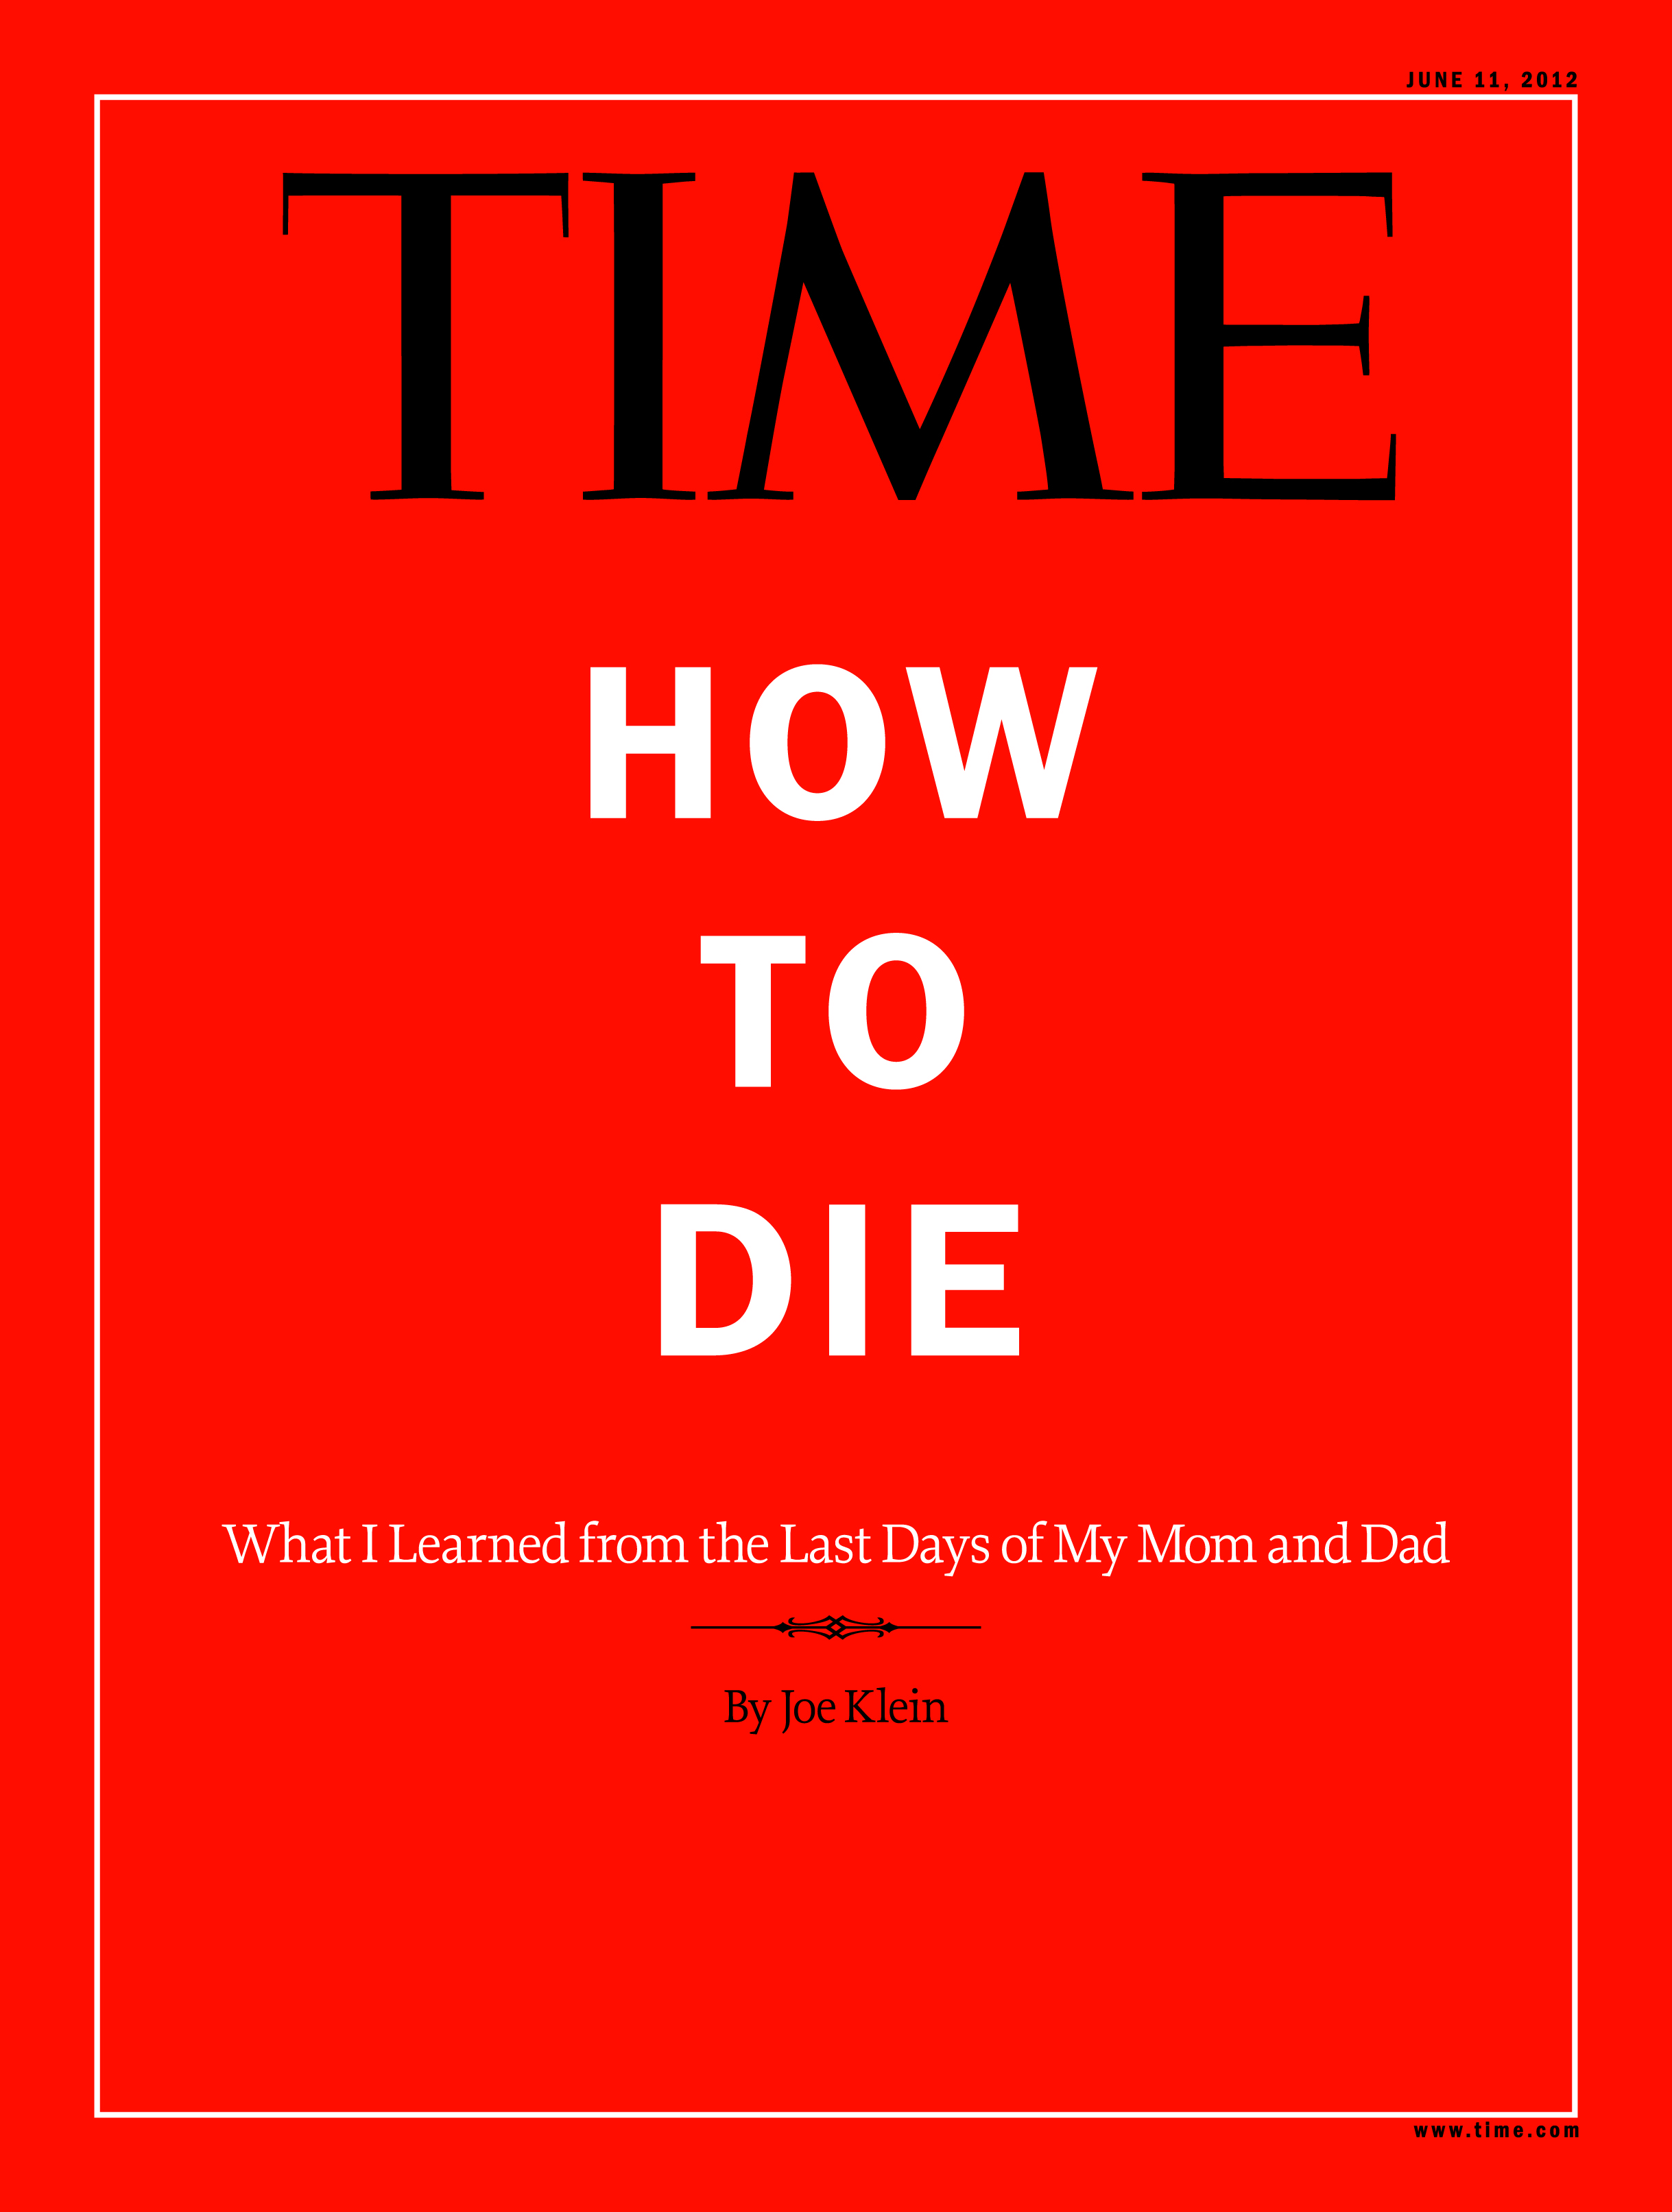 TIME-June 11, 2012: "How to Die"